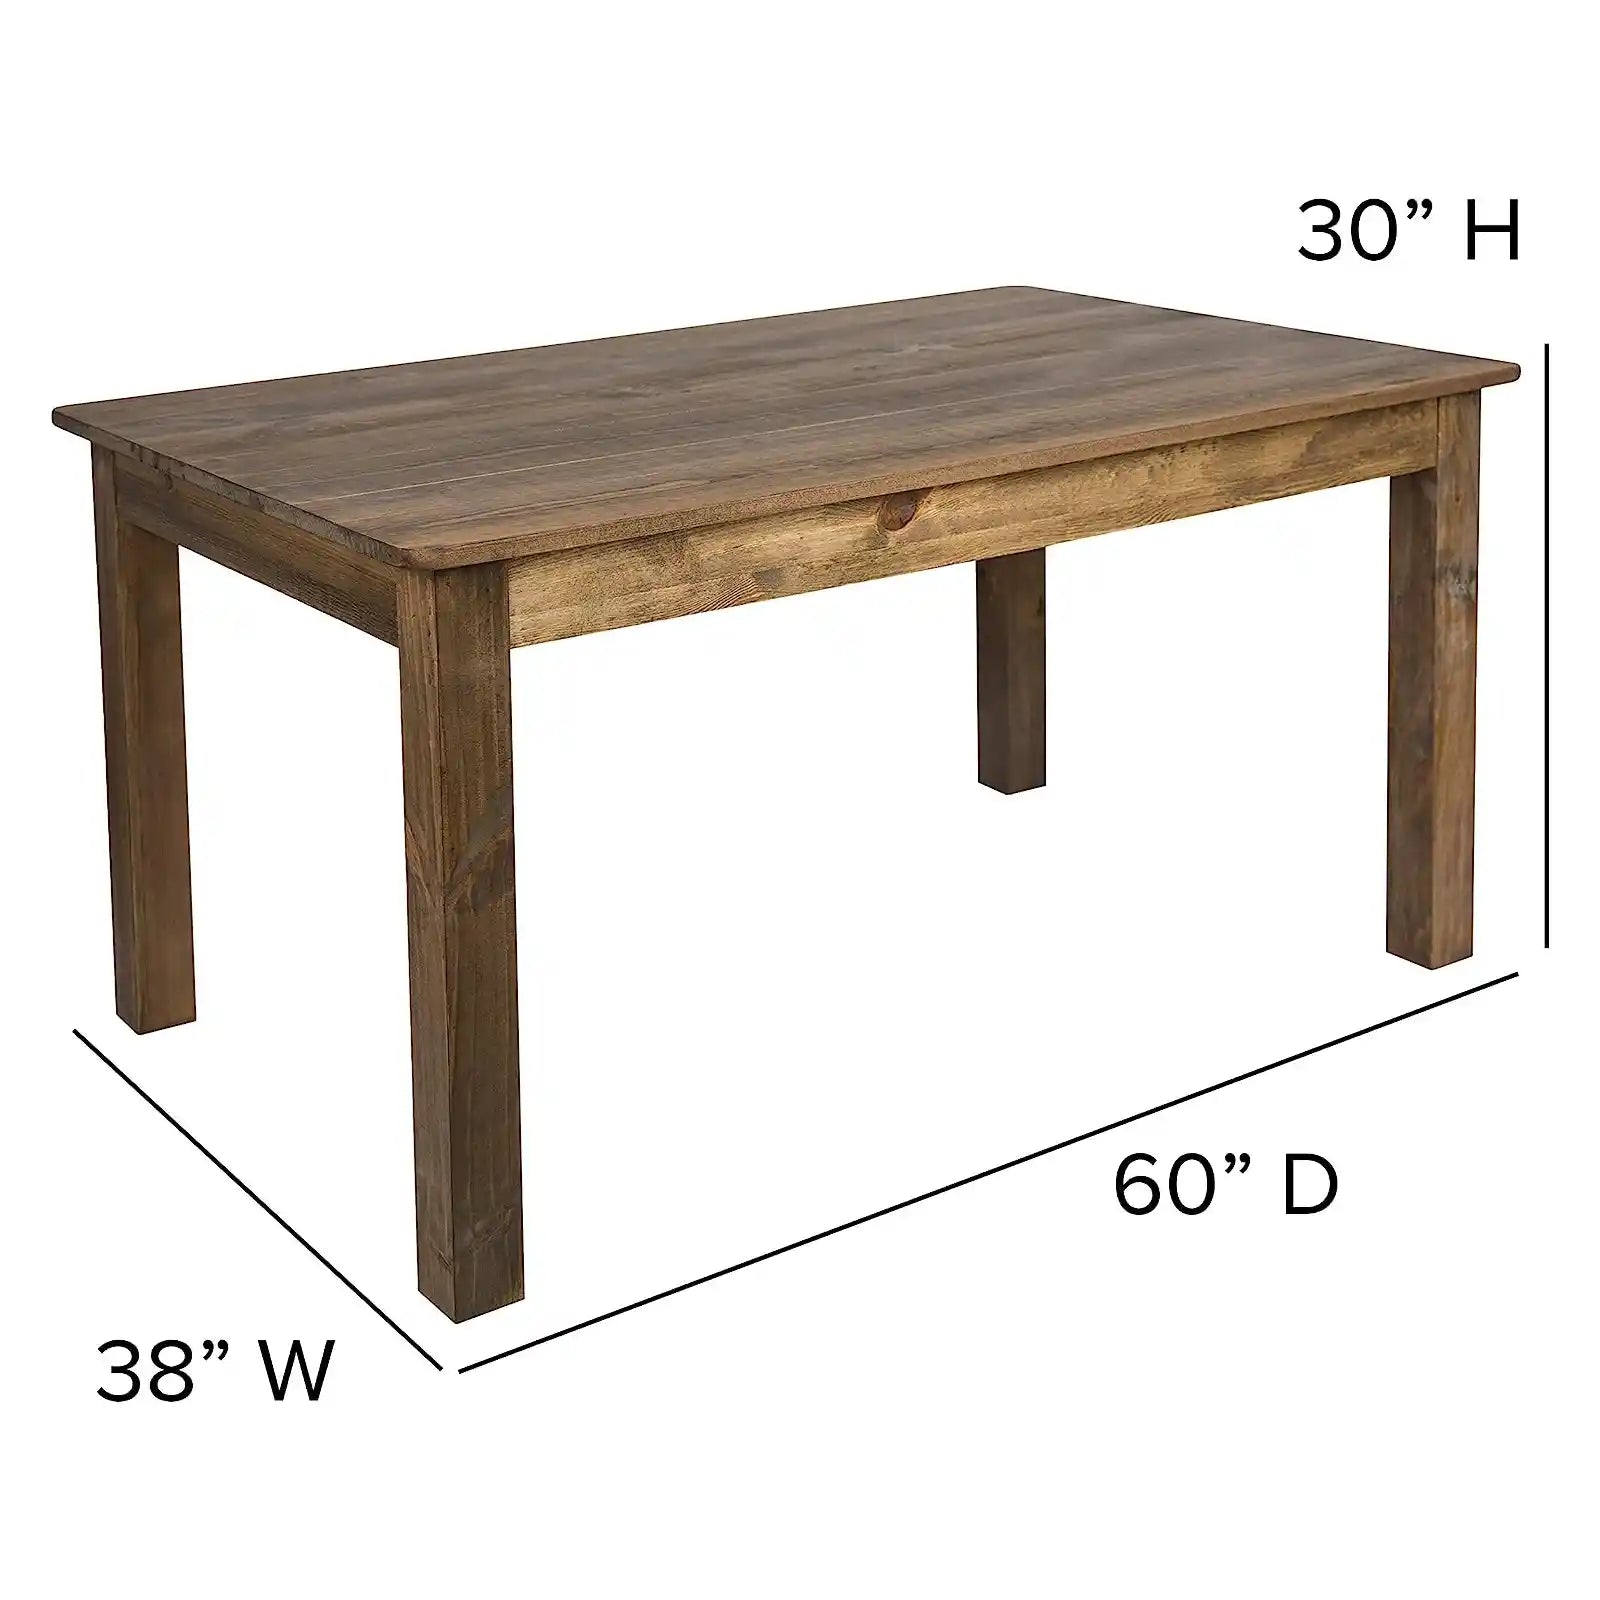 Rectangular Antique Rustic Solid Pine Wood Dining Table, Farmhouse Table